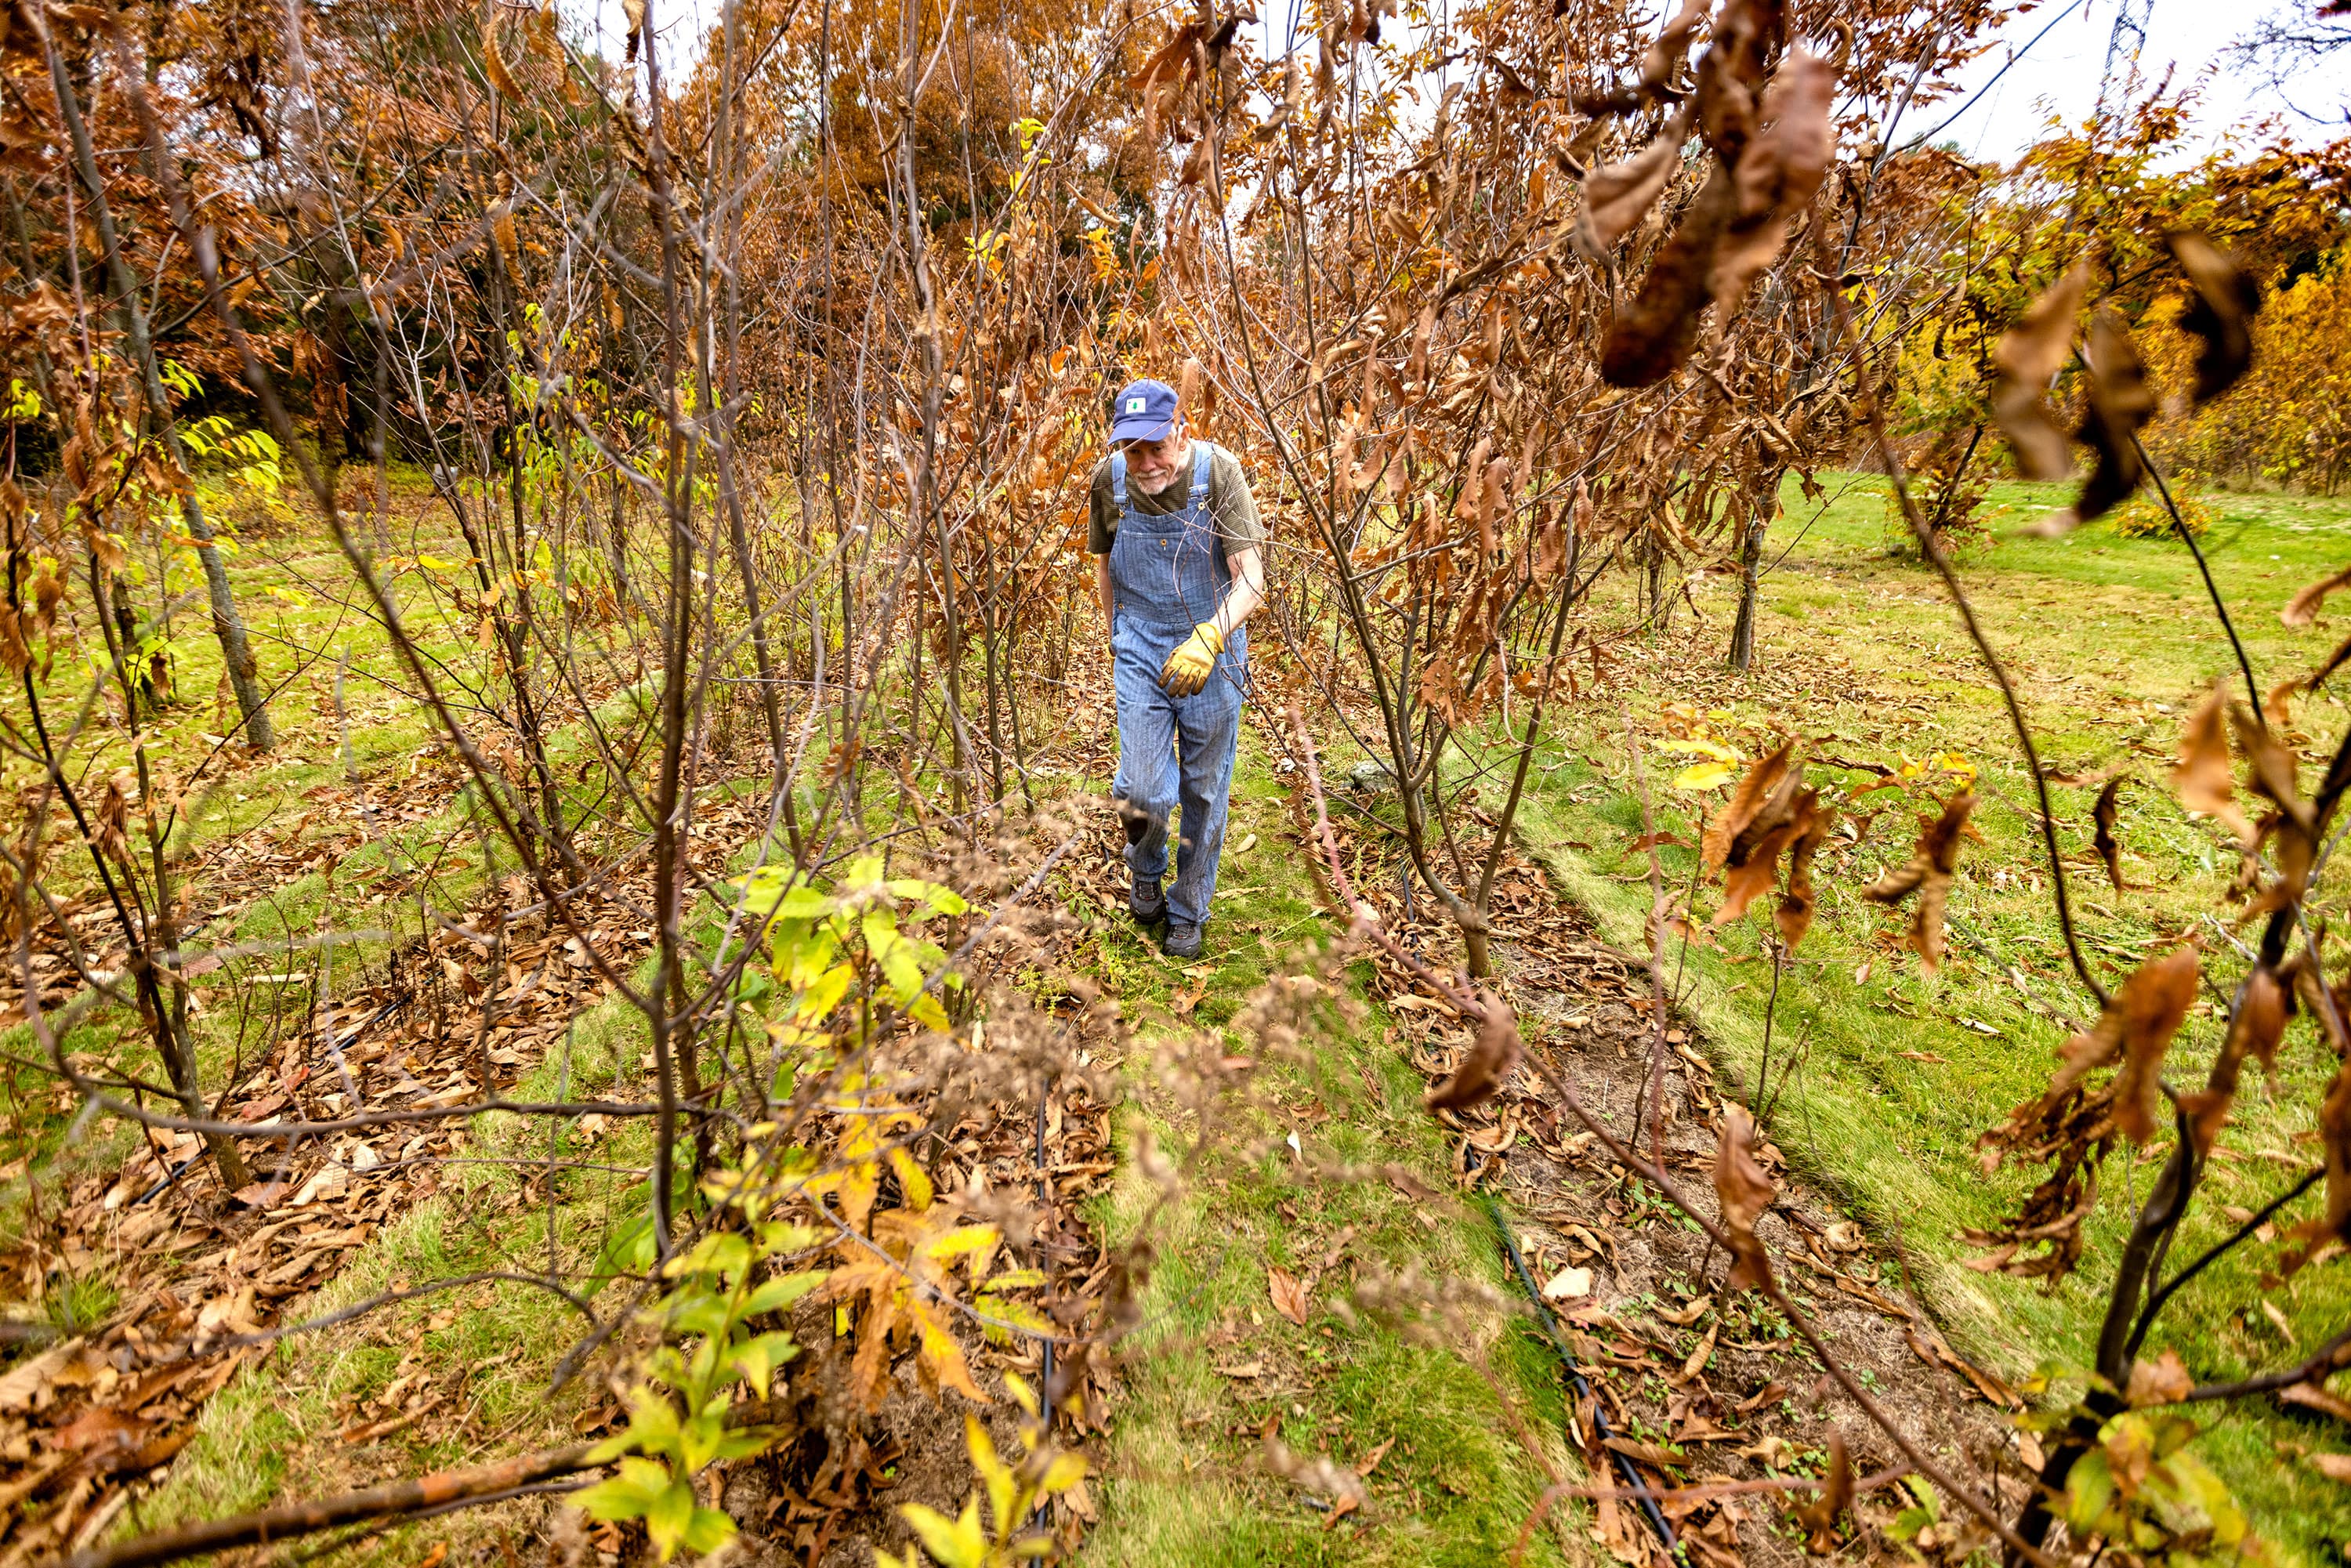 John Emery makes his way through a secluded orchard of chestnut trees in Weston where chestnut blight-resistant tree hybrids are being cultivated. (Jesse Costa/WBUR)